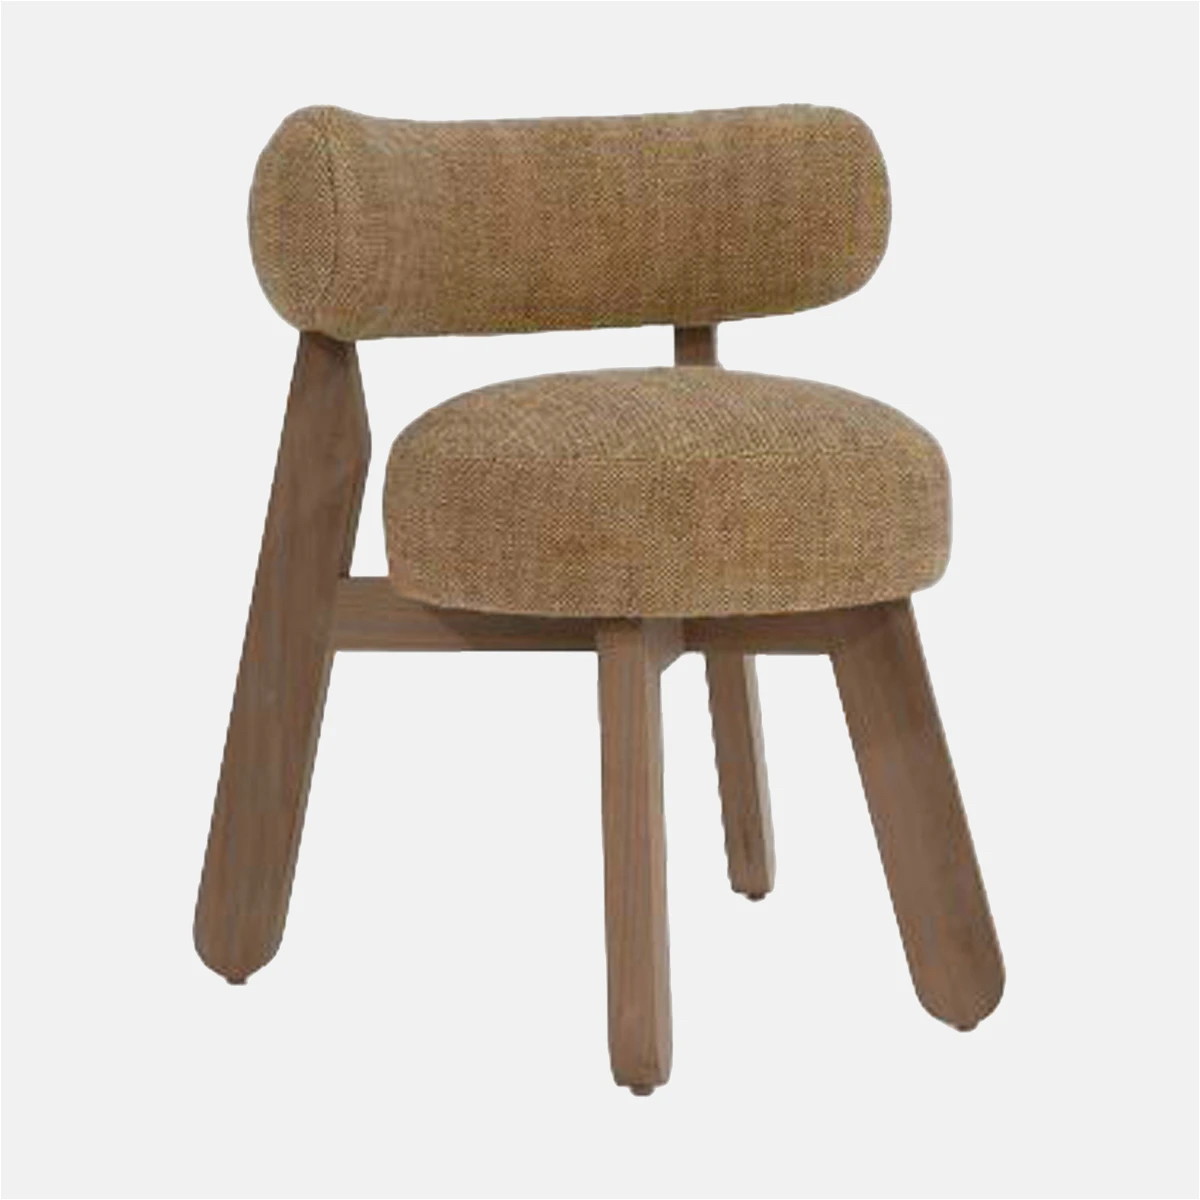 a wooden chair with a tan upholstered seat